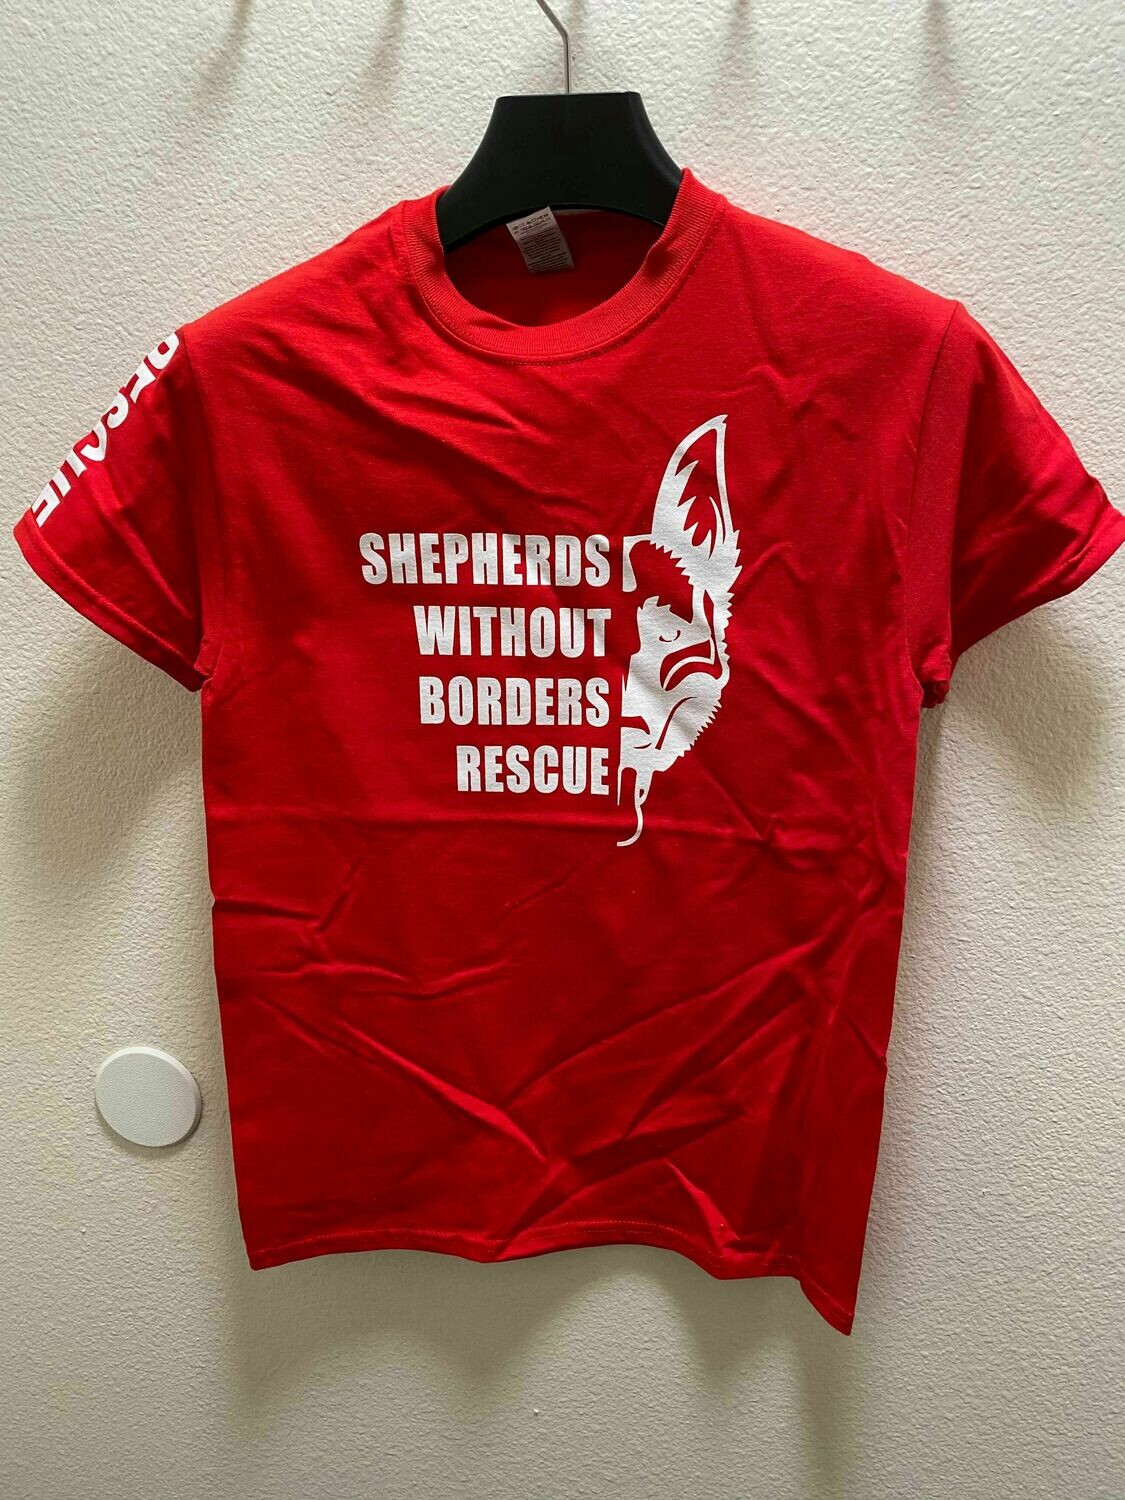 SWB Supporter Crew-Neck Shirt (Red) - 2XL